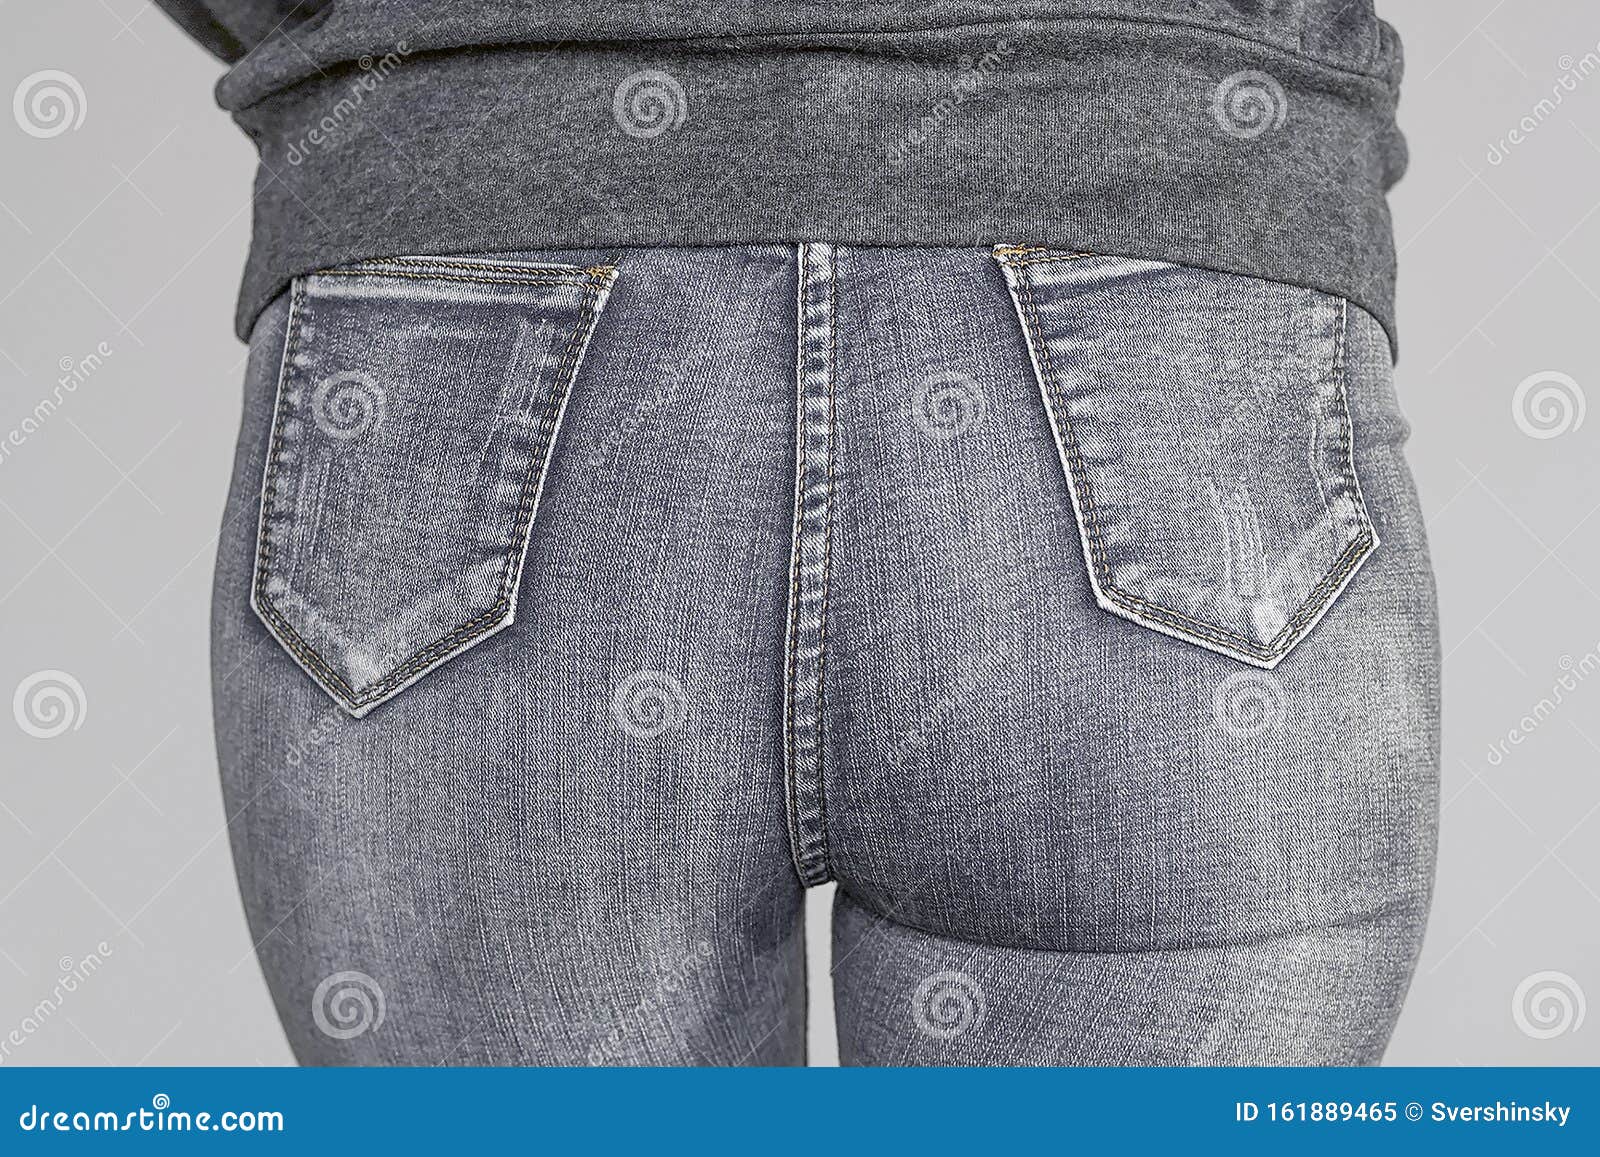 Hot butt in jeans 369 Sexy Female Butt Jeans Photos Free Royalty Free Stock Photos From Dreamstime